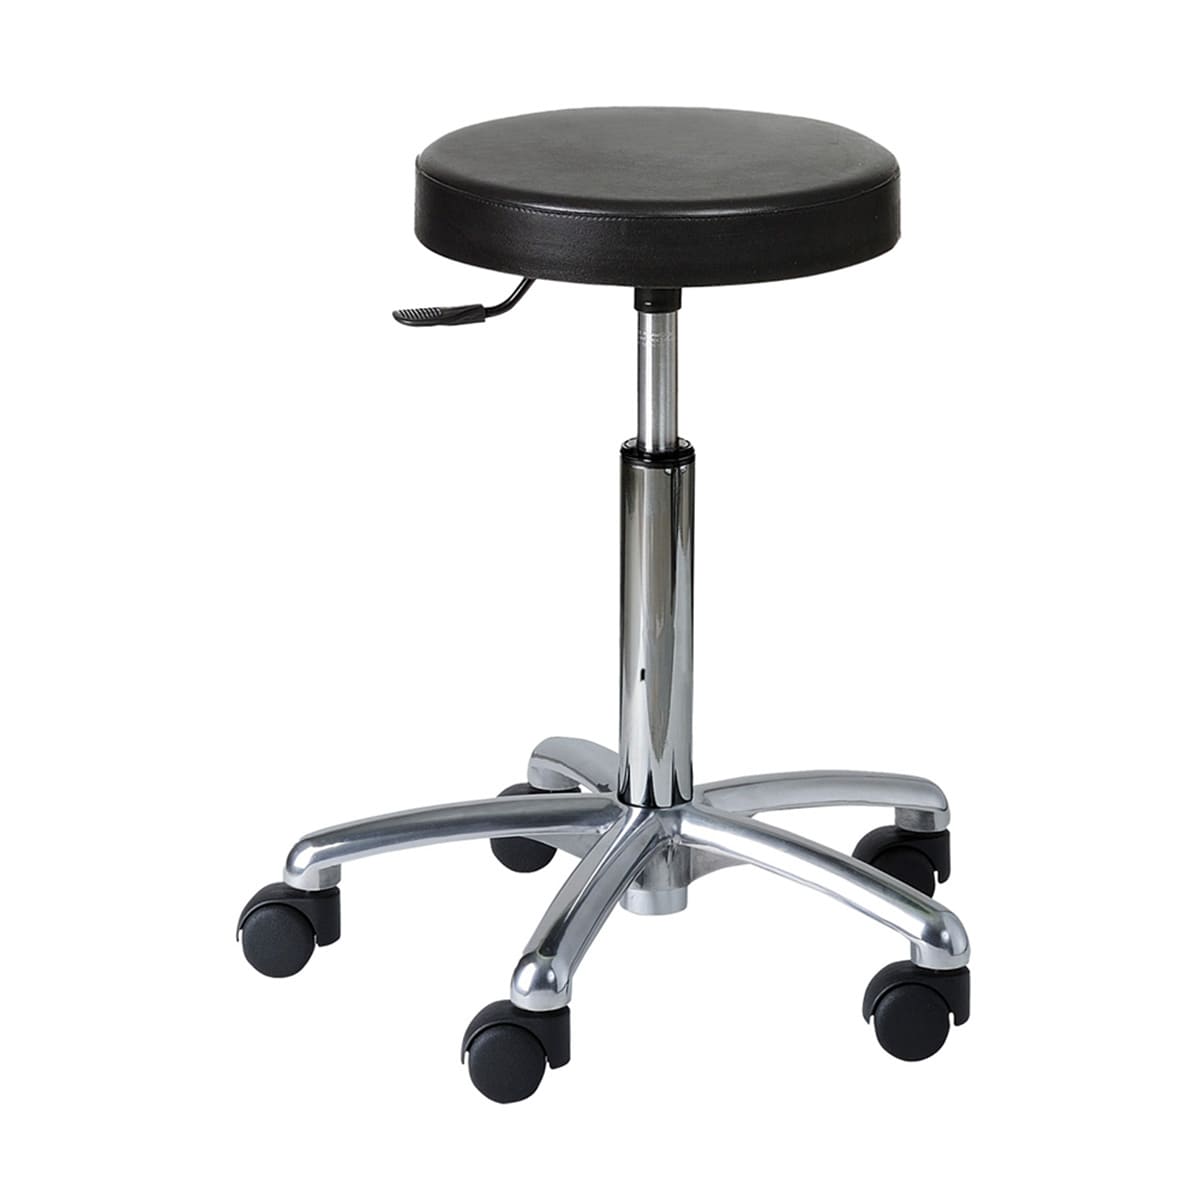 Tabouret assise ronde polyuréthane, base inox